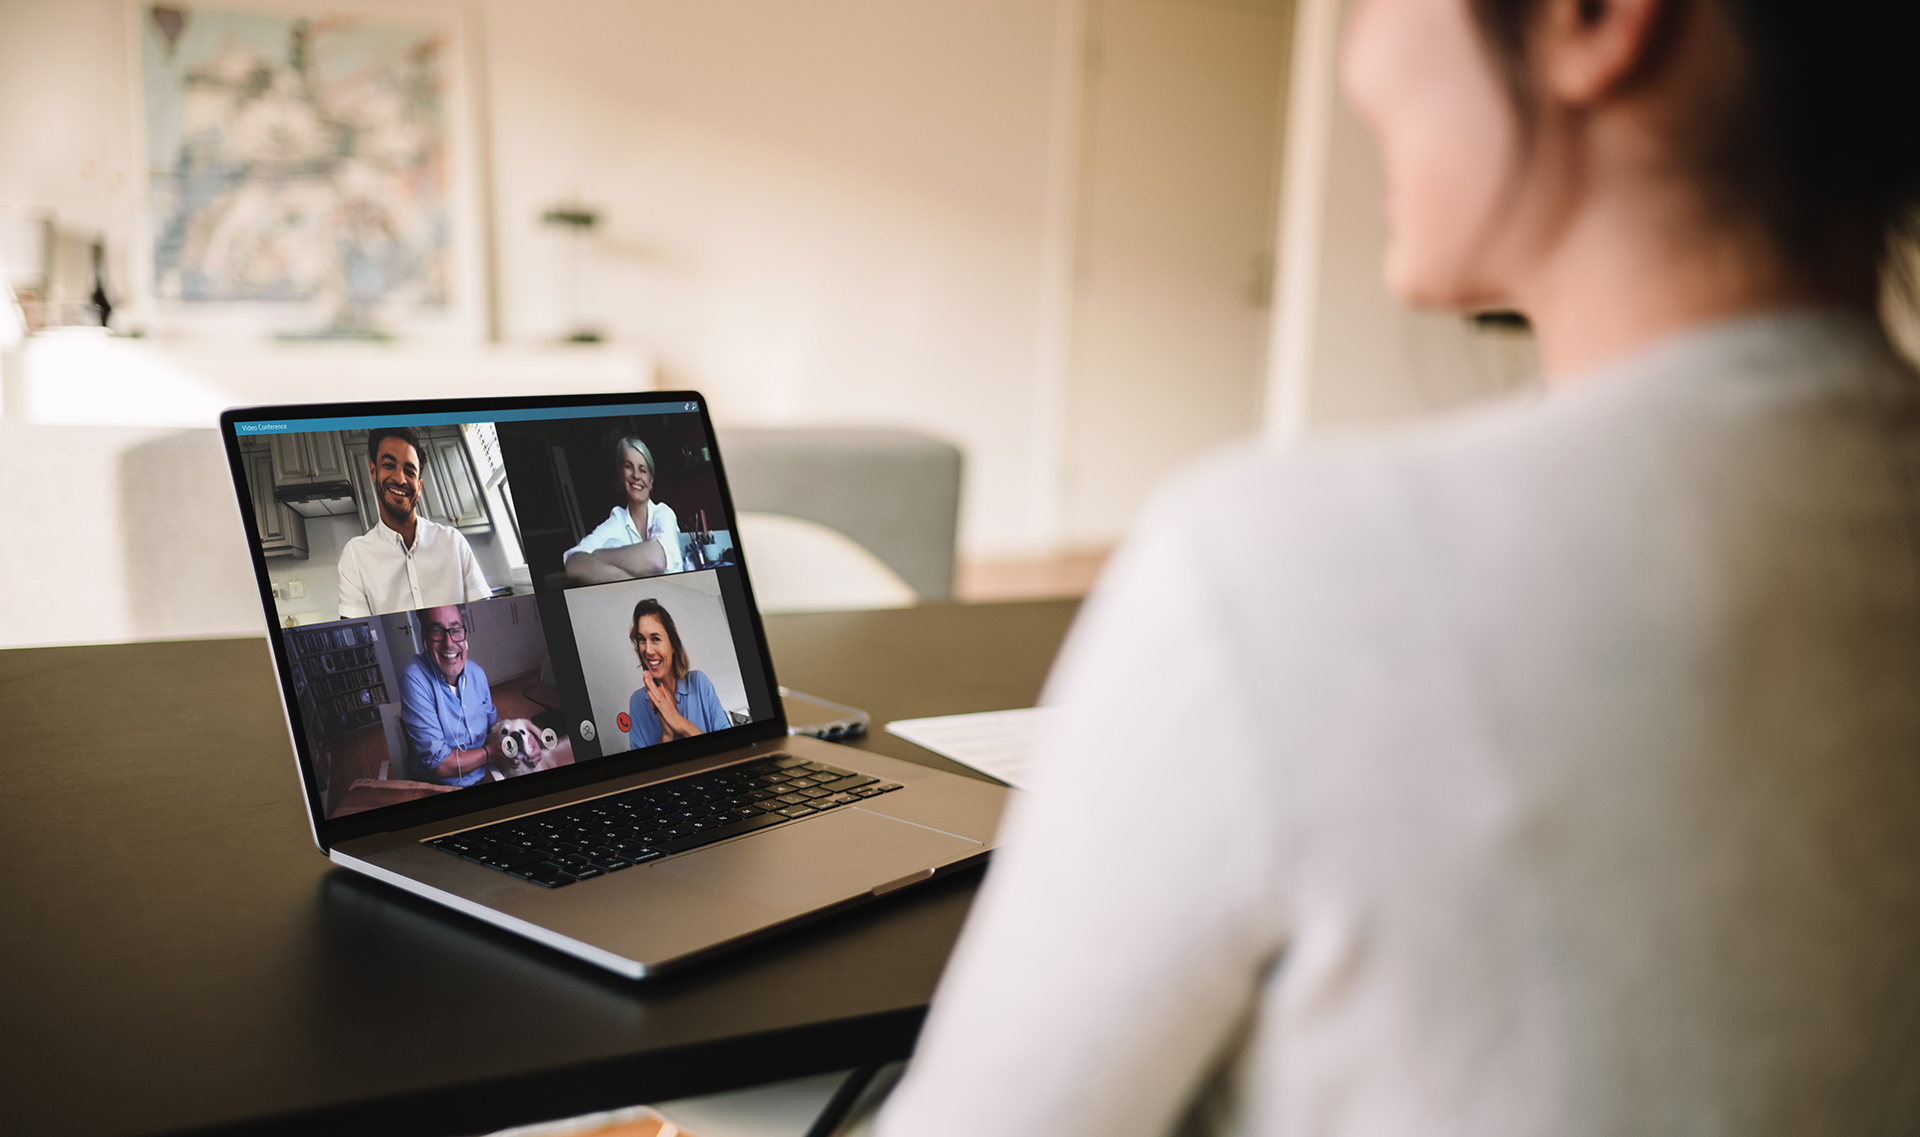 Microsoft Teams vs. Zoom vs. Google: Comparing Features of Top Video Conferencing Apps